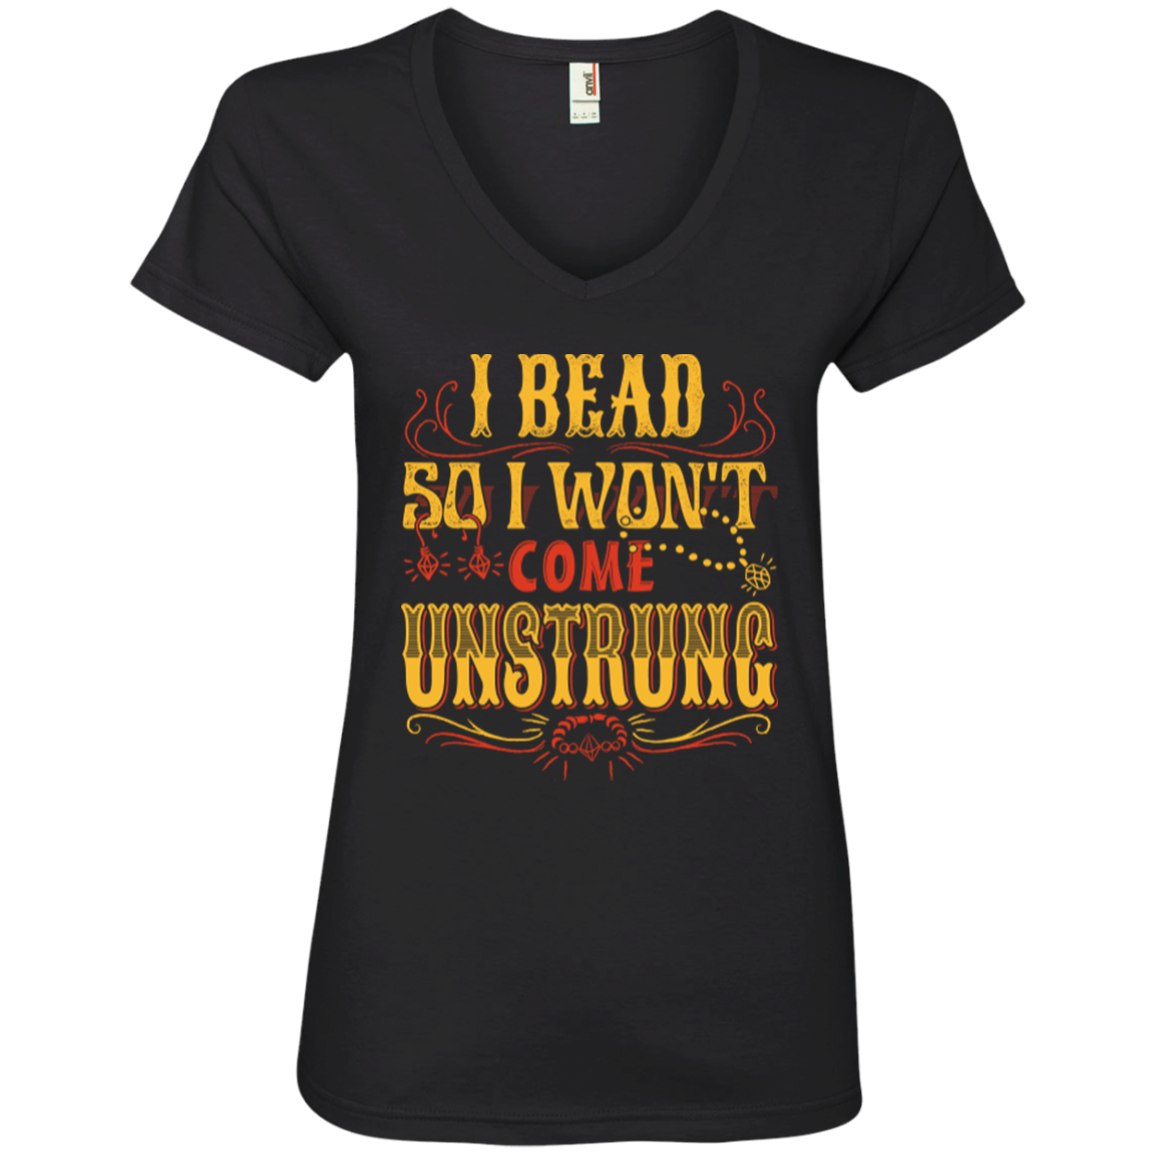 I Bead So I Won't Come Unstrung (gold) Ladies V-neck Tee - Crafter4Life - 3